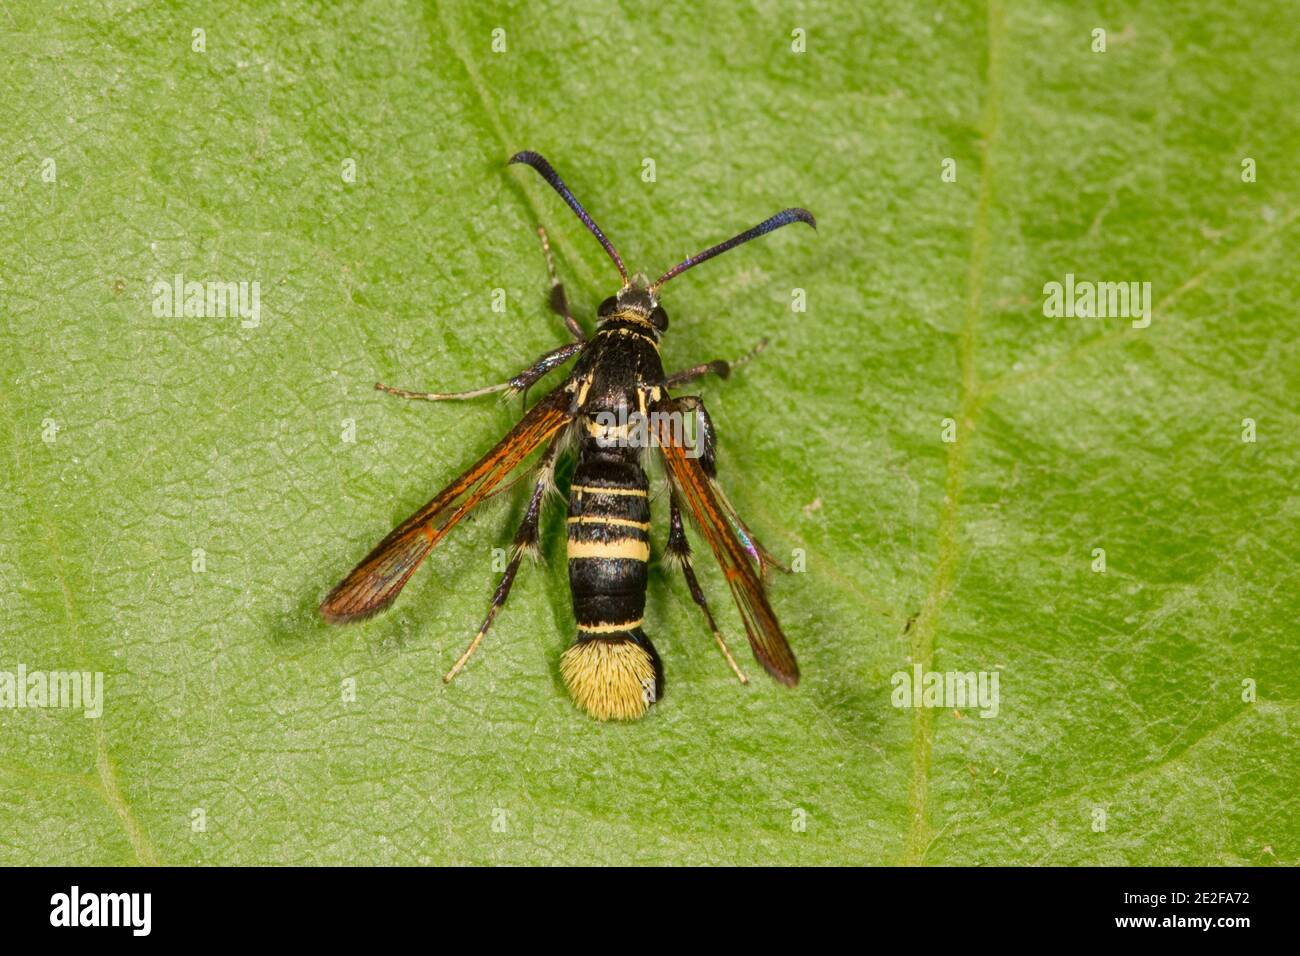 Western Oak Clearwing Moth female, Carmenta querci, Sesiidae. Forewing Length 7 mm. Literature states that they have been reared from cynipid galls on Stock Photo